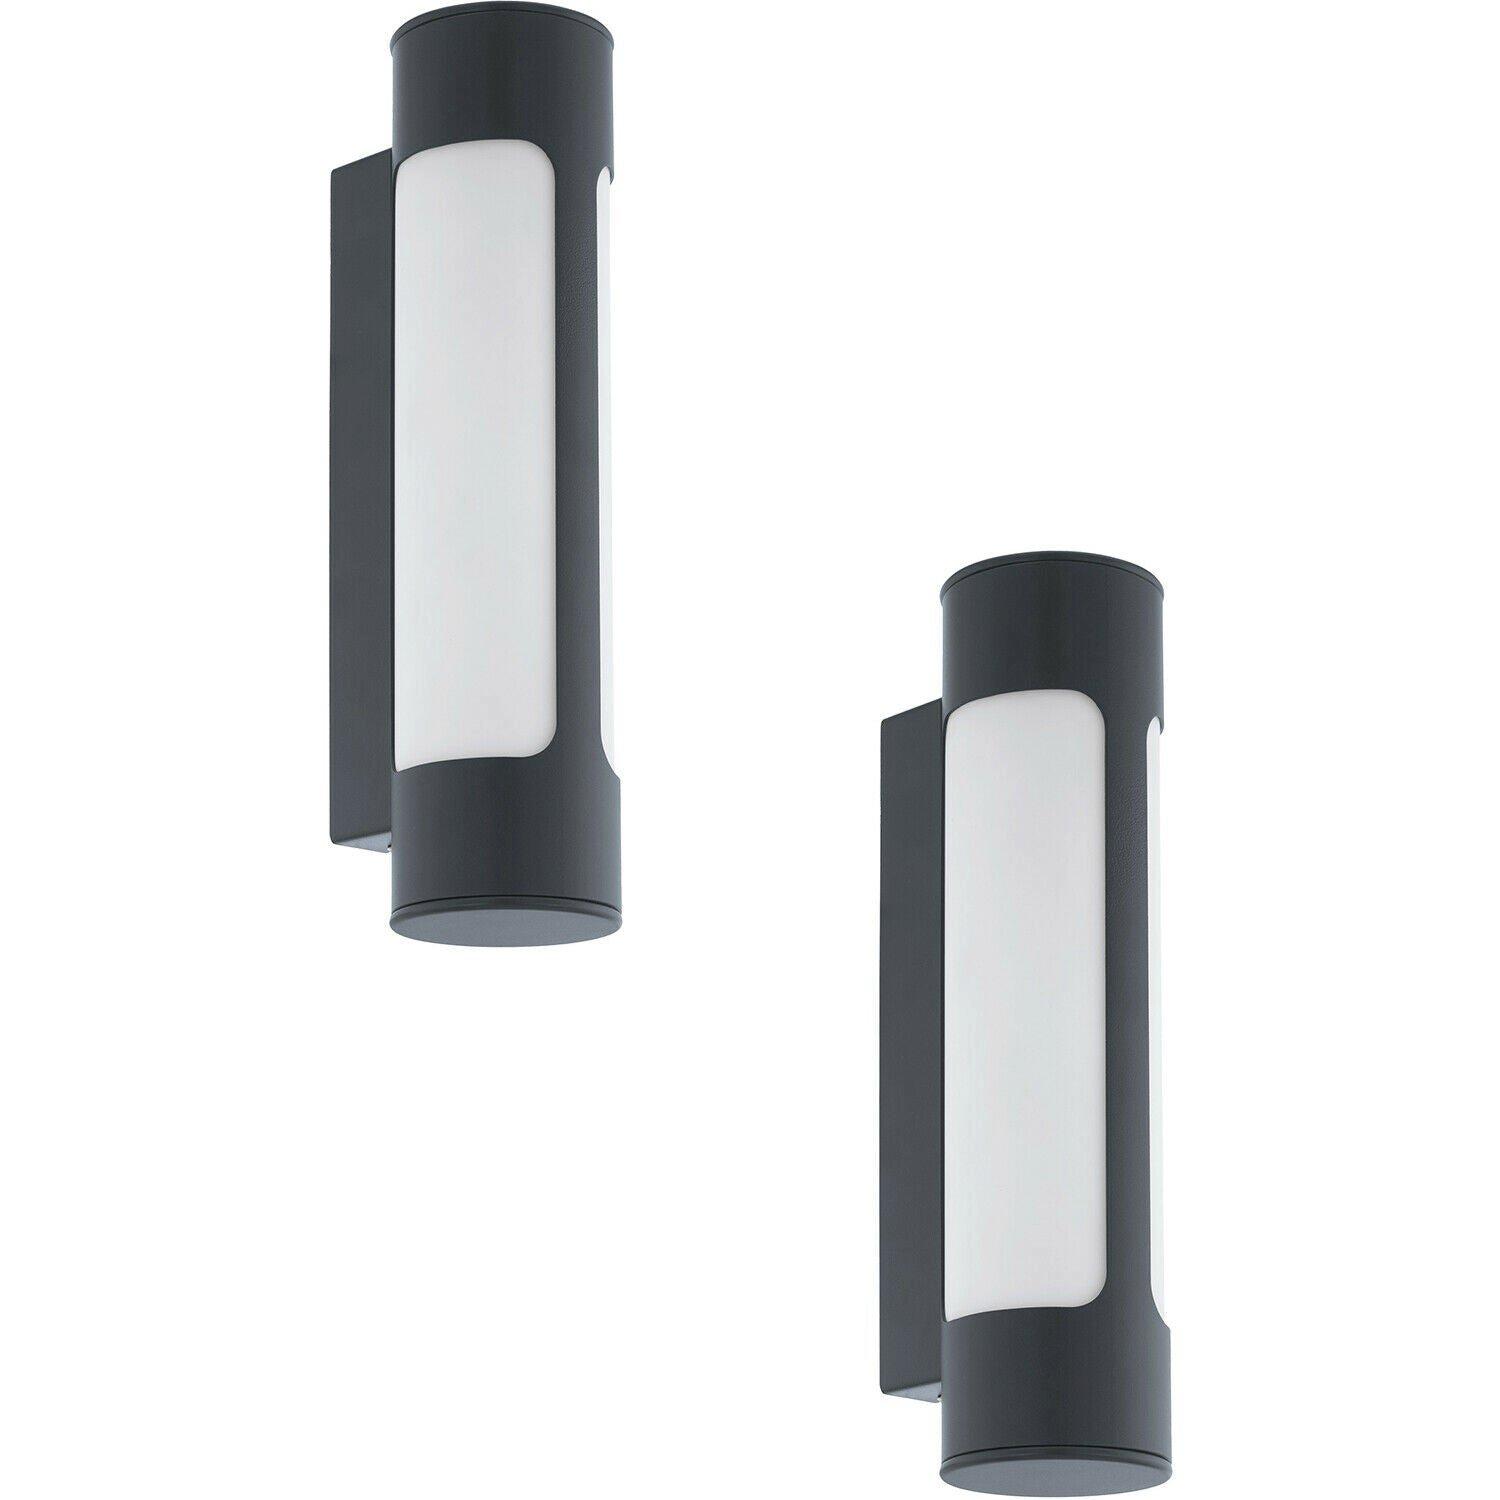 2 PACK IP44 Outdoor Wall Light Anthracite Zinc Plated Steel 6W Built in LED